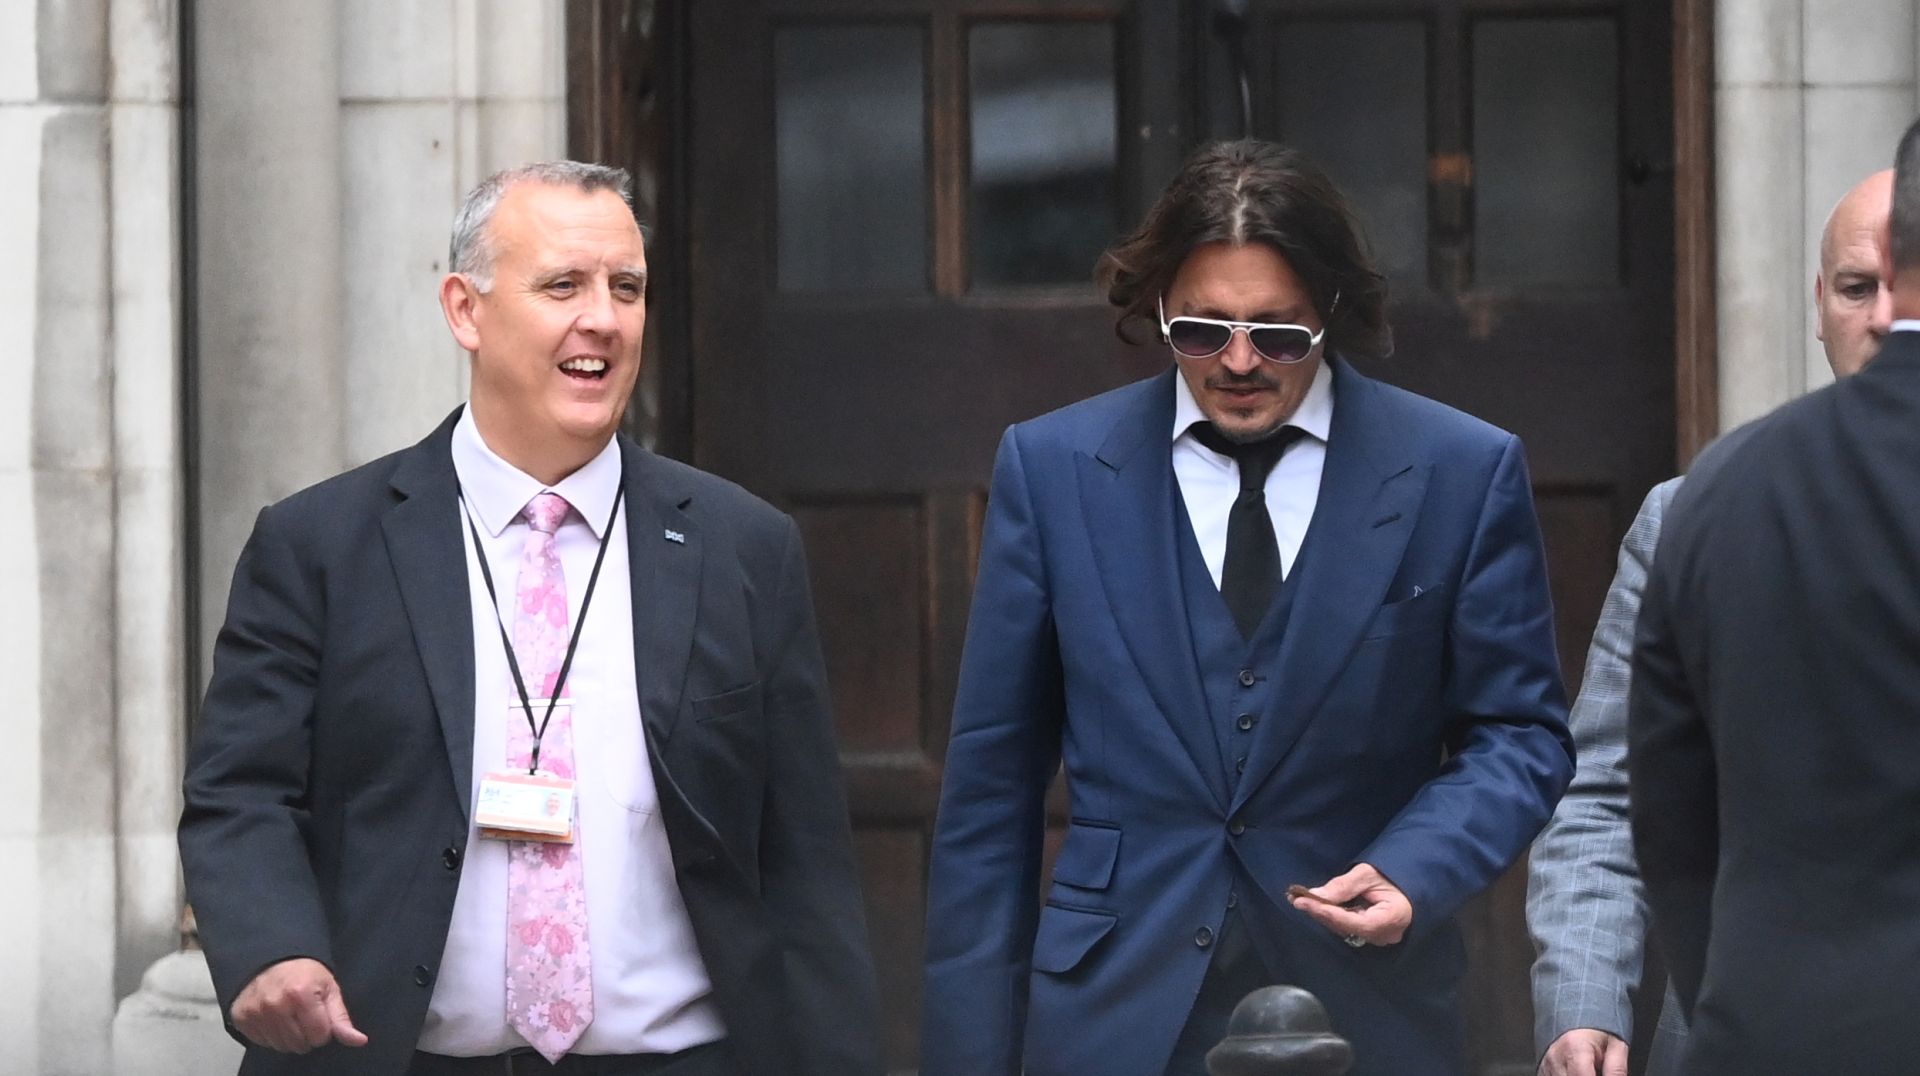 epa08532741 US actor Johnny Depp (C) leaves the Royal Courts of Justice in London, Britain, 07 July 2020. Depp is suing The Sun's newspaper publisher News Group Newspapers (NGN) over claims he abused his ex-wife, US actress Amber Heard, reports state.  EPA/FACUNDO ARRIZABALAGA